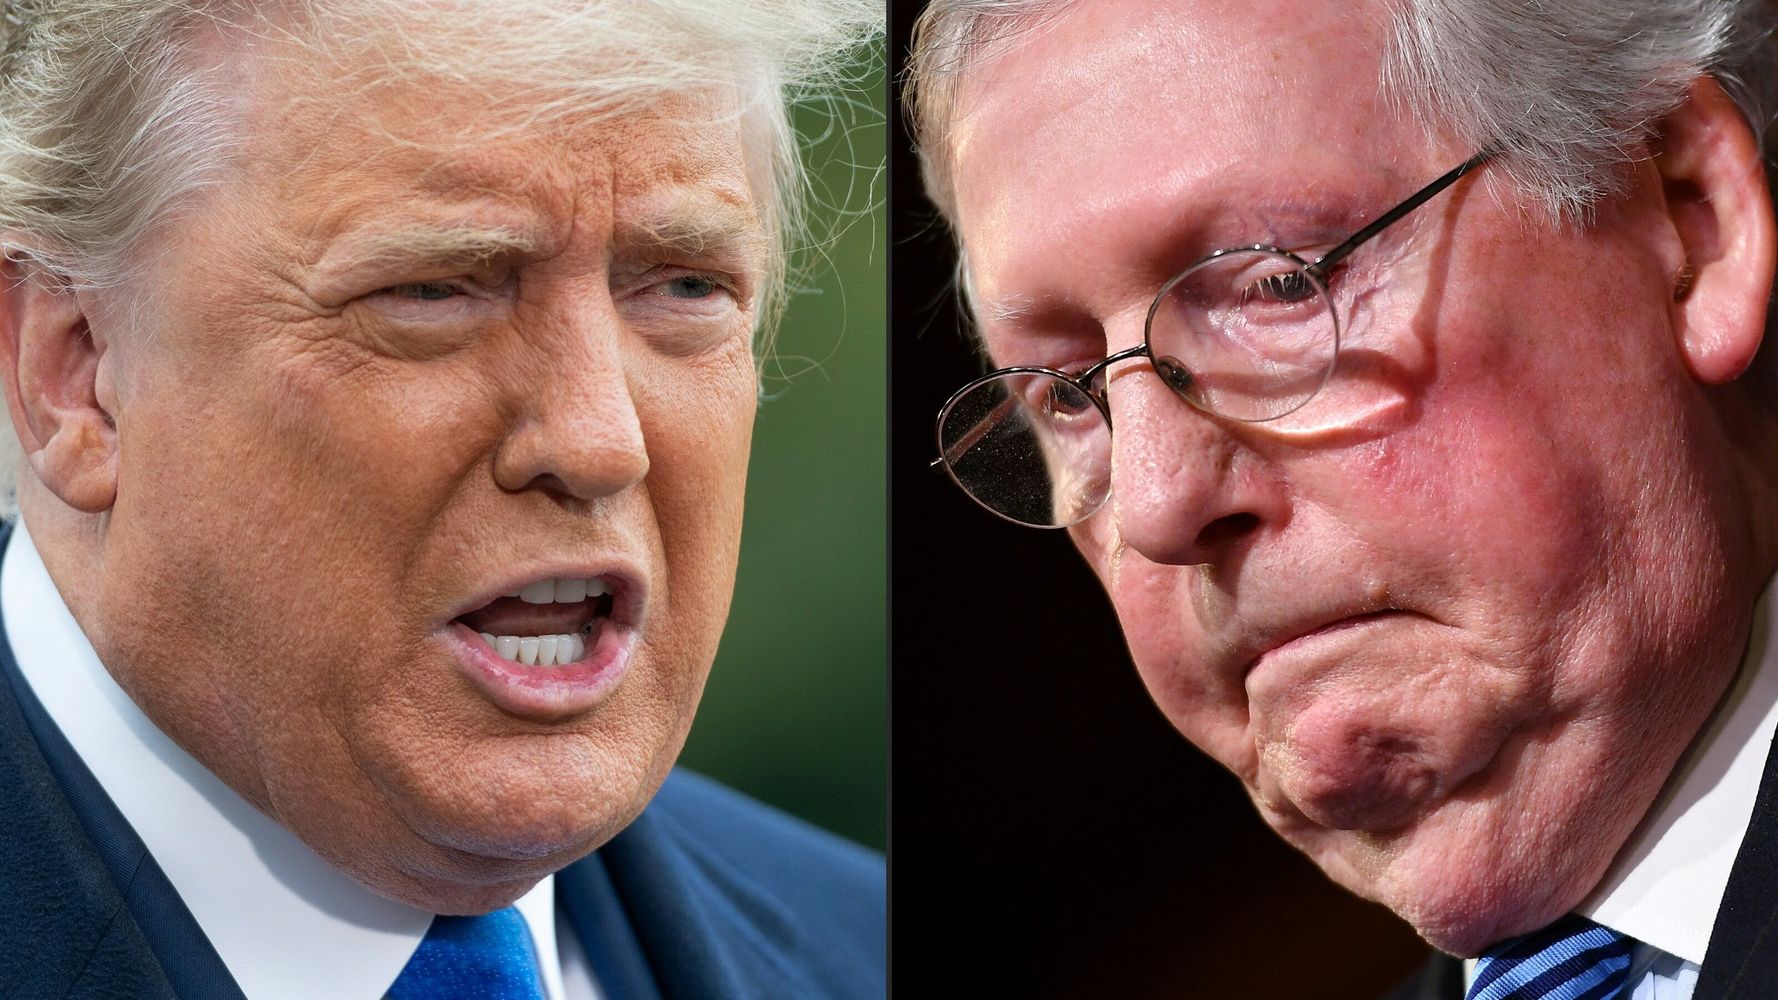 Mitch McConnell Trashed Donald Trump's Value To GOP, New Book Claims